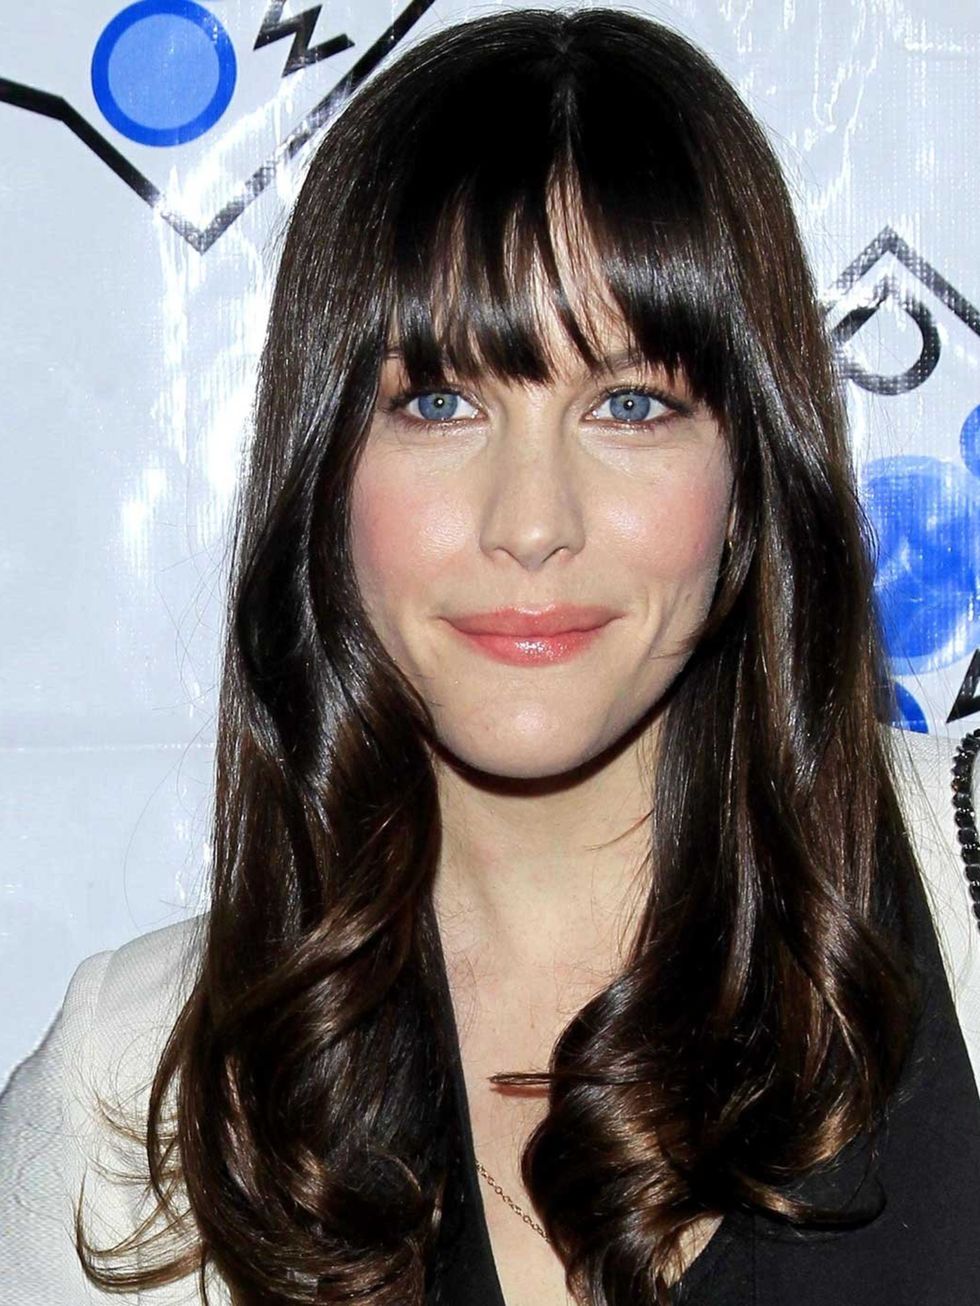 <p>The biggest hair trend this year has to be the fringe (or bangs if youre reading this Stateside). Not one, but eight stars have stepped out this year with freshly cut fringes. <a href="http://www.elleuk.com/star-style/celebrity-style-files/nicole-rich